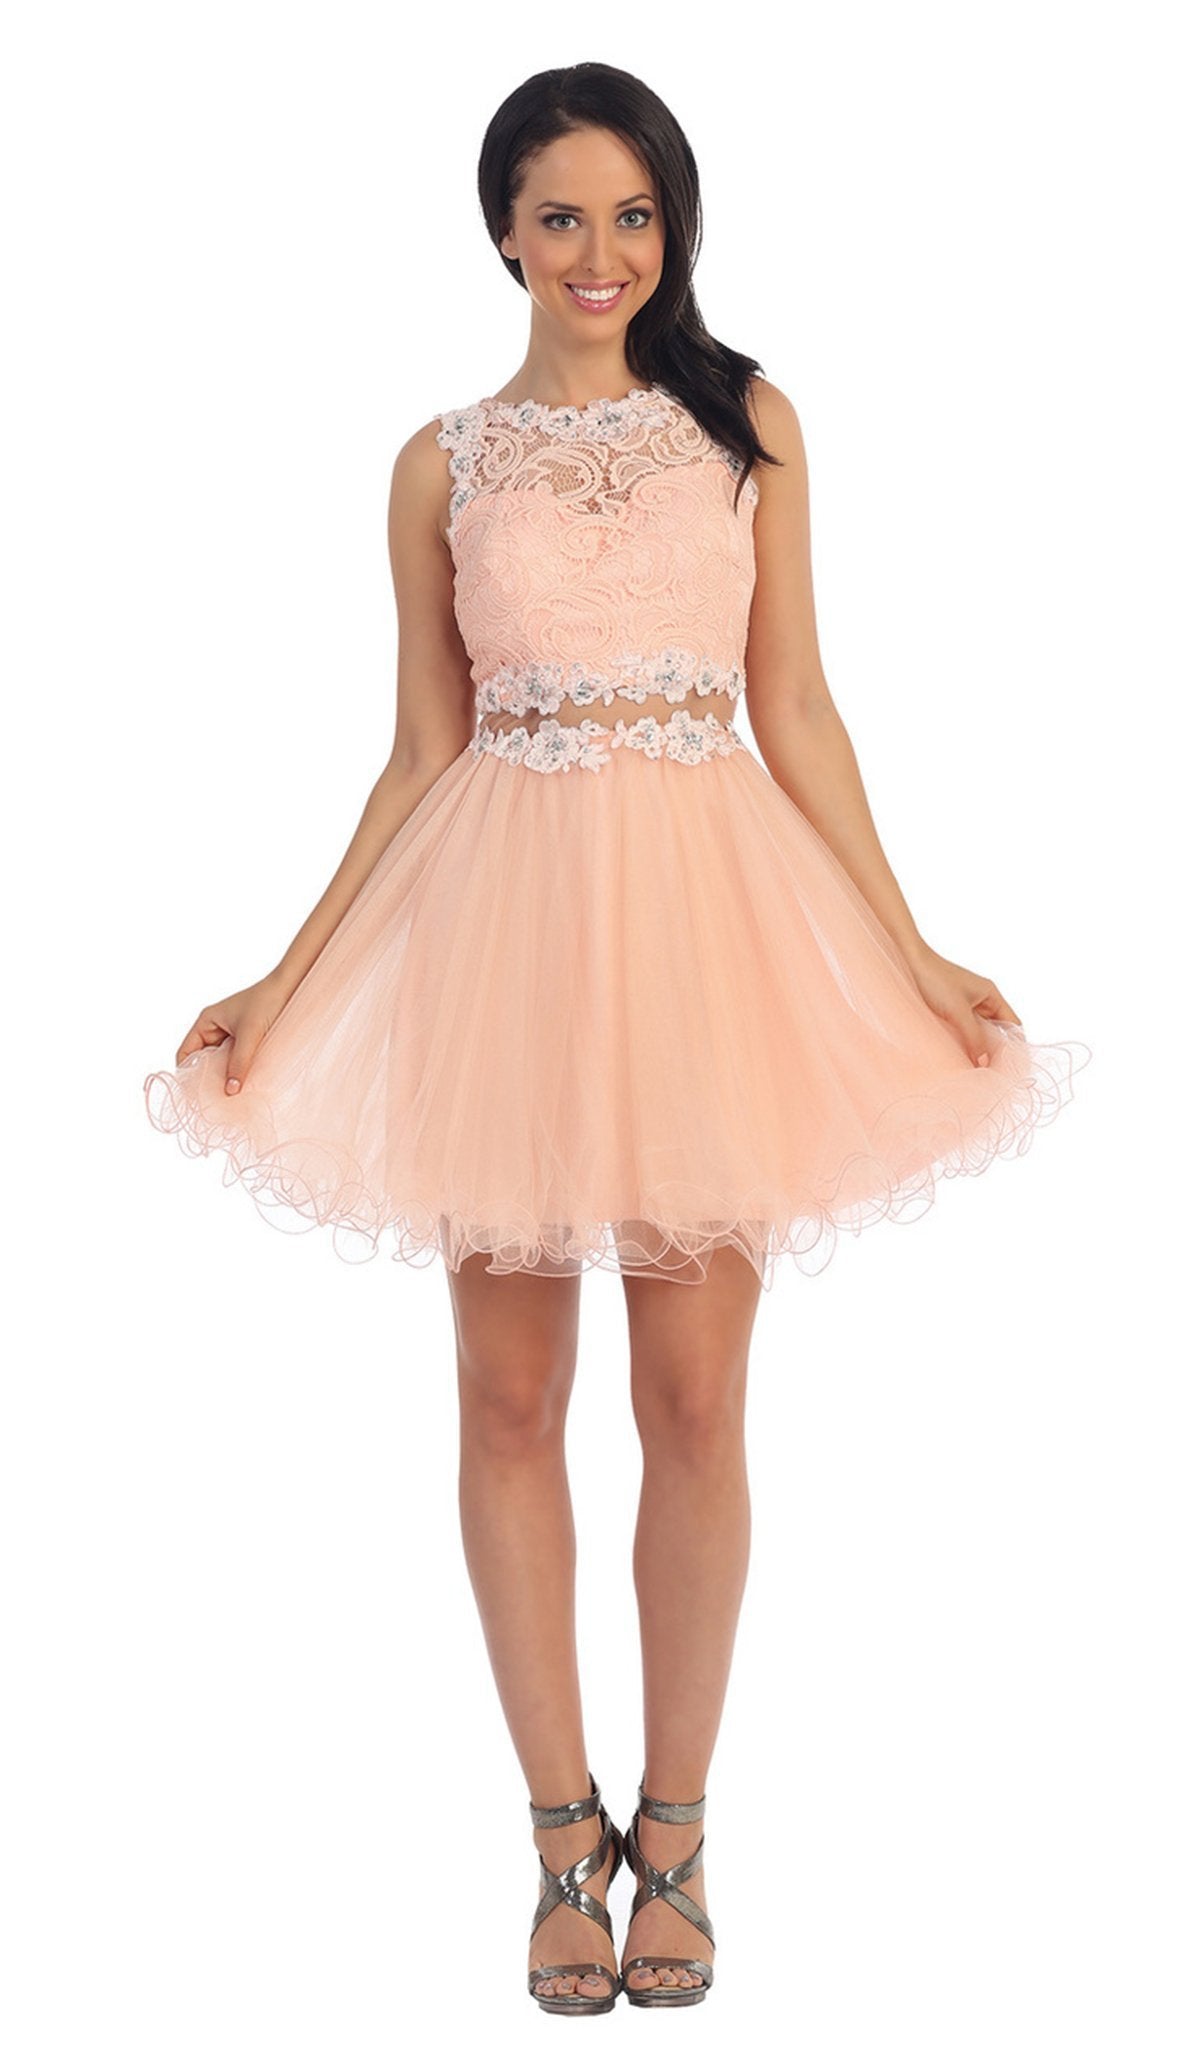 Dancing Queen - 9080 Bejeweled Lace Illusion Short Prom Dress Prom Dresses XS / Peach